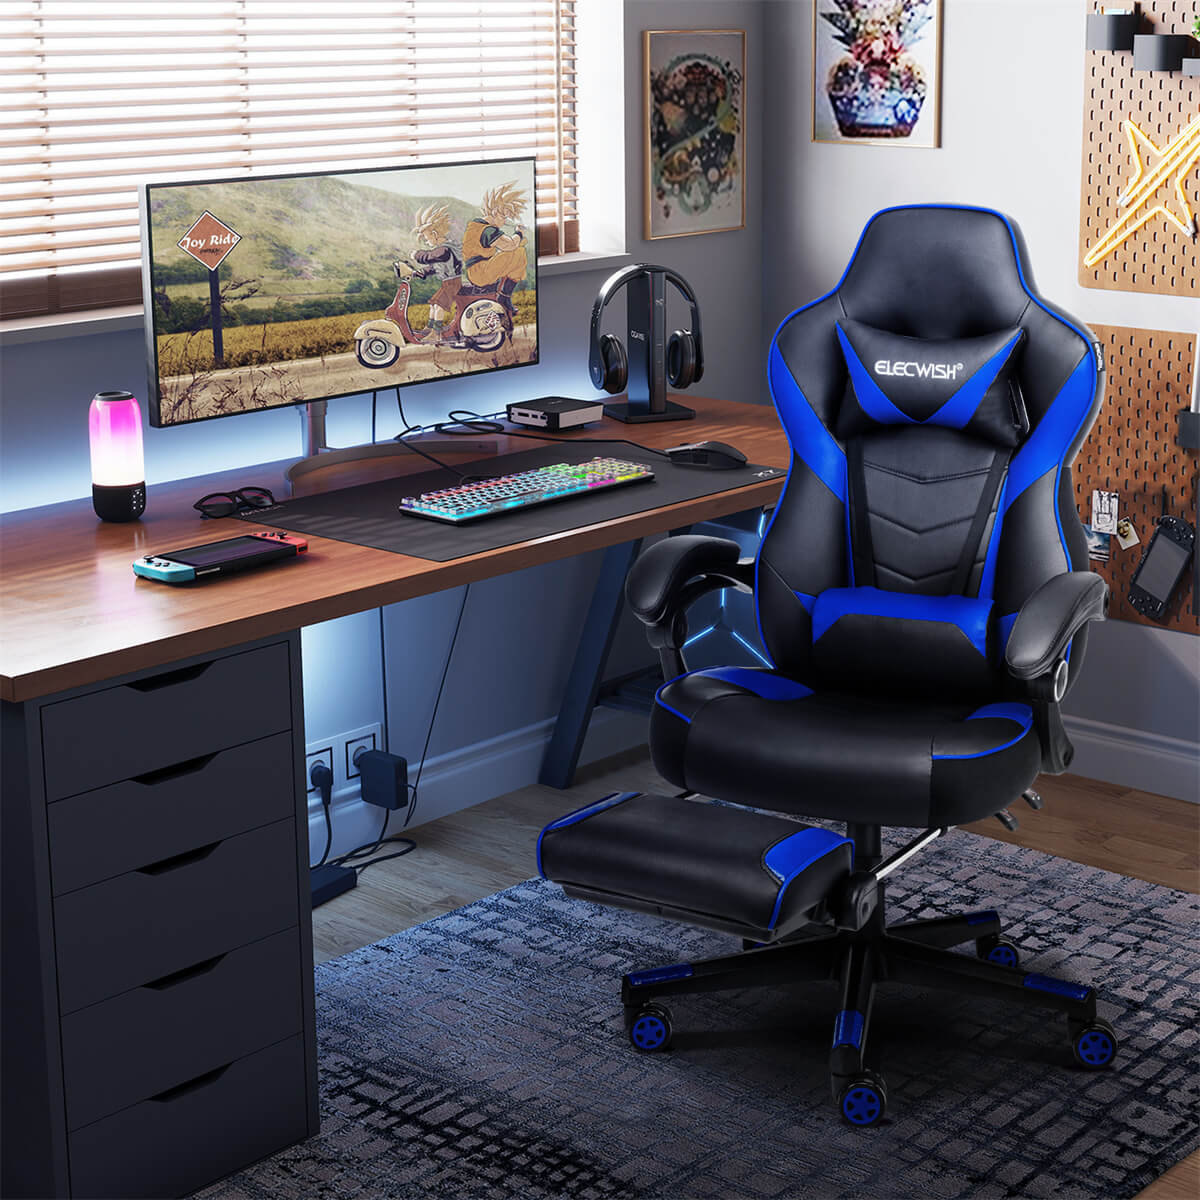 Elecwish Video Game Chairs Blue Gaming Chair With Footrest OC087 displays in the gaming room